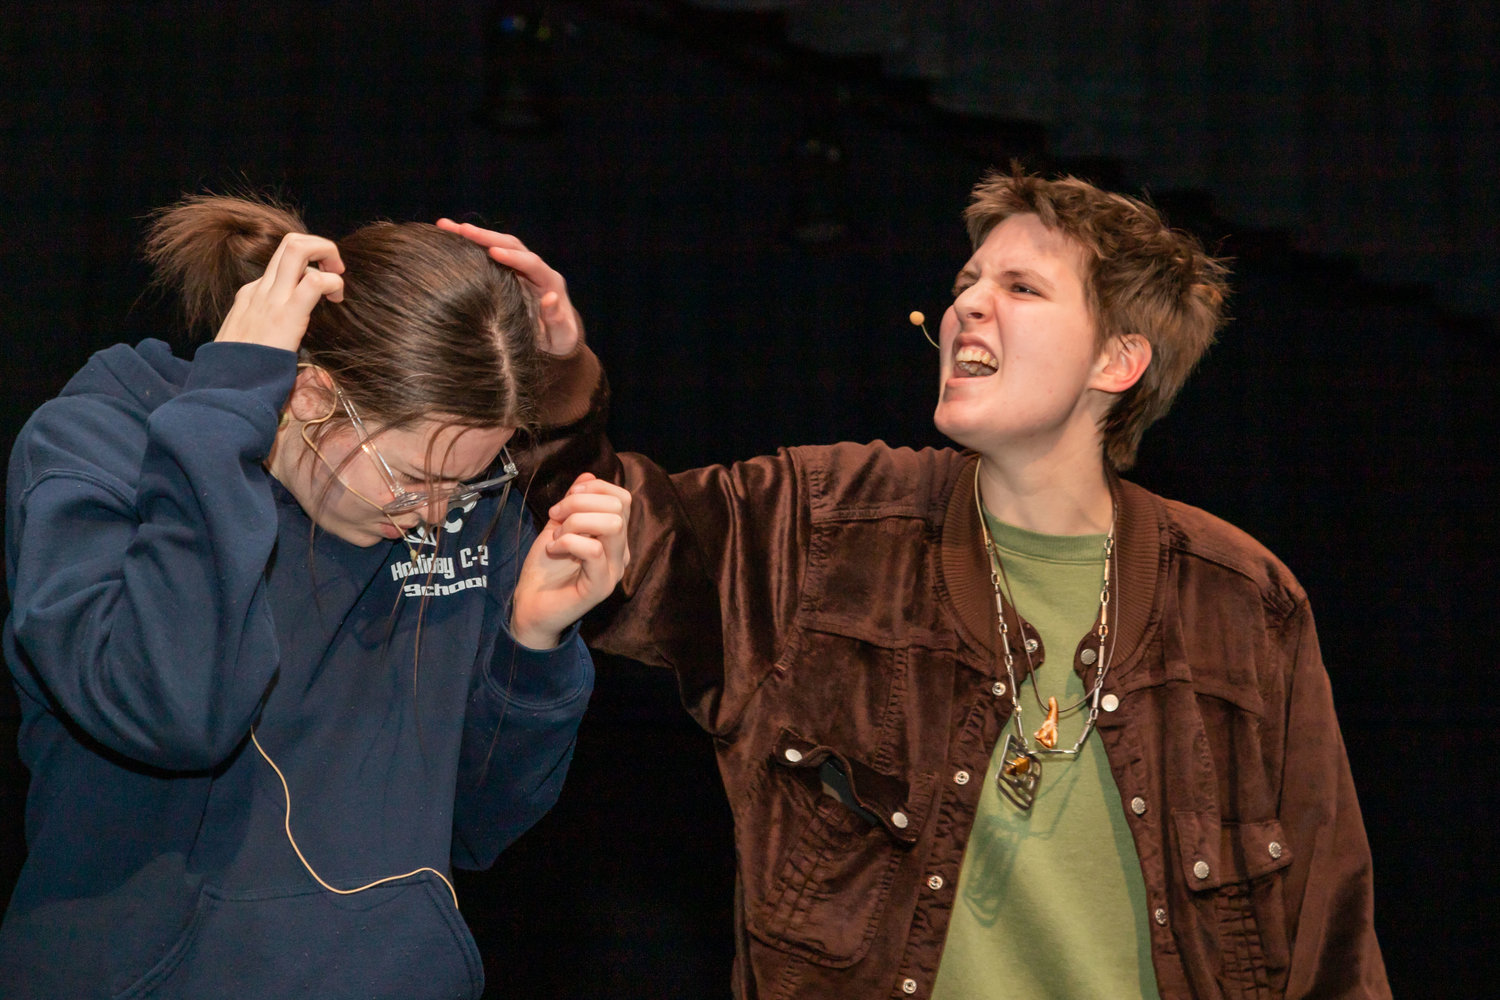 Madeline Corderman, right, in the role of Susan Jones, hurls insults at her daughter, played by Paige Hull, during a rehearsal of “Discovering Amelia,” Moberly High School’s spring play.